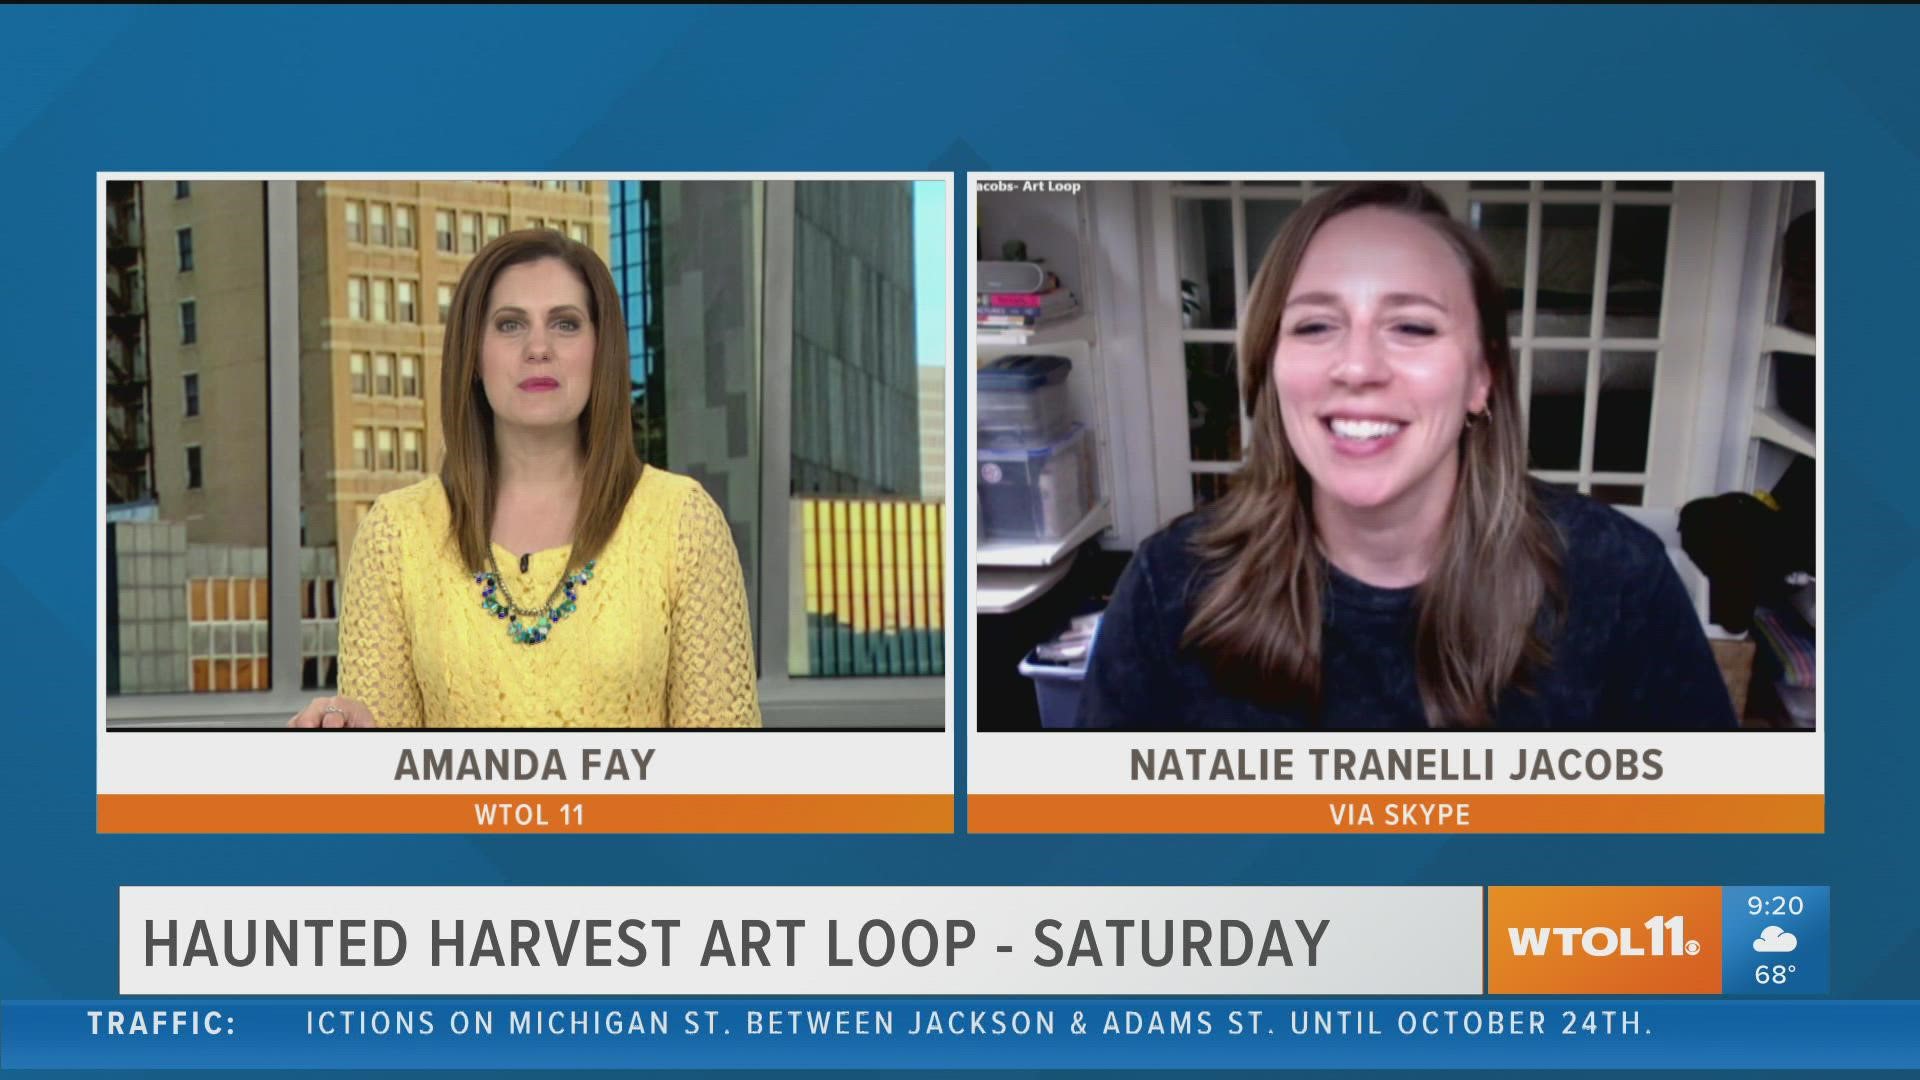 The Art Loop in downtown Toledo is getting a little spooky this weekend! Check out the Haunted Harvest Art Loop on Saturday.